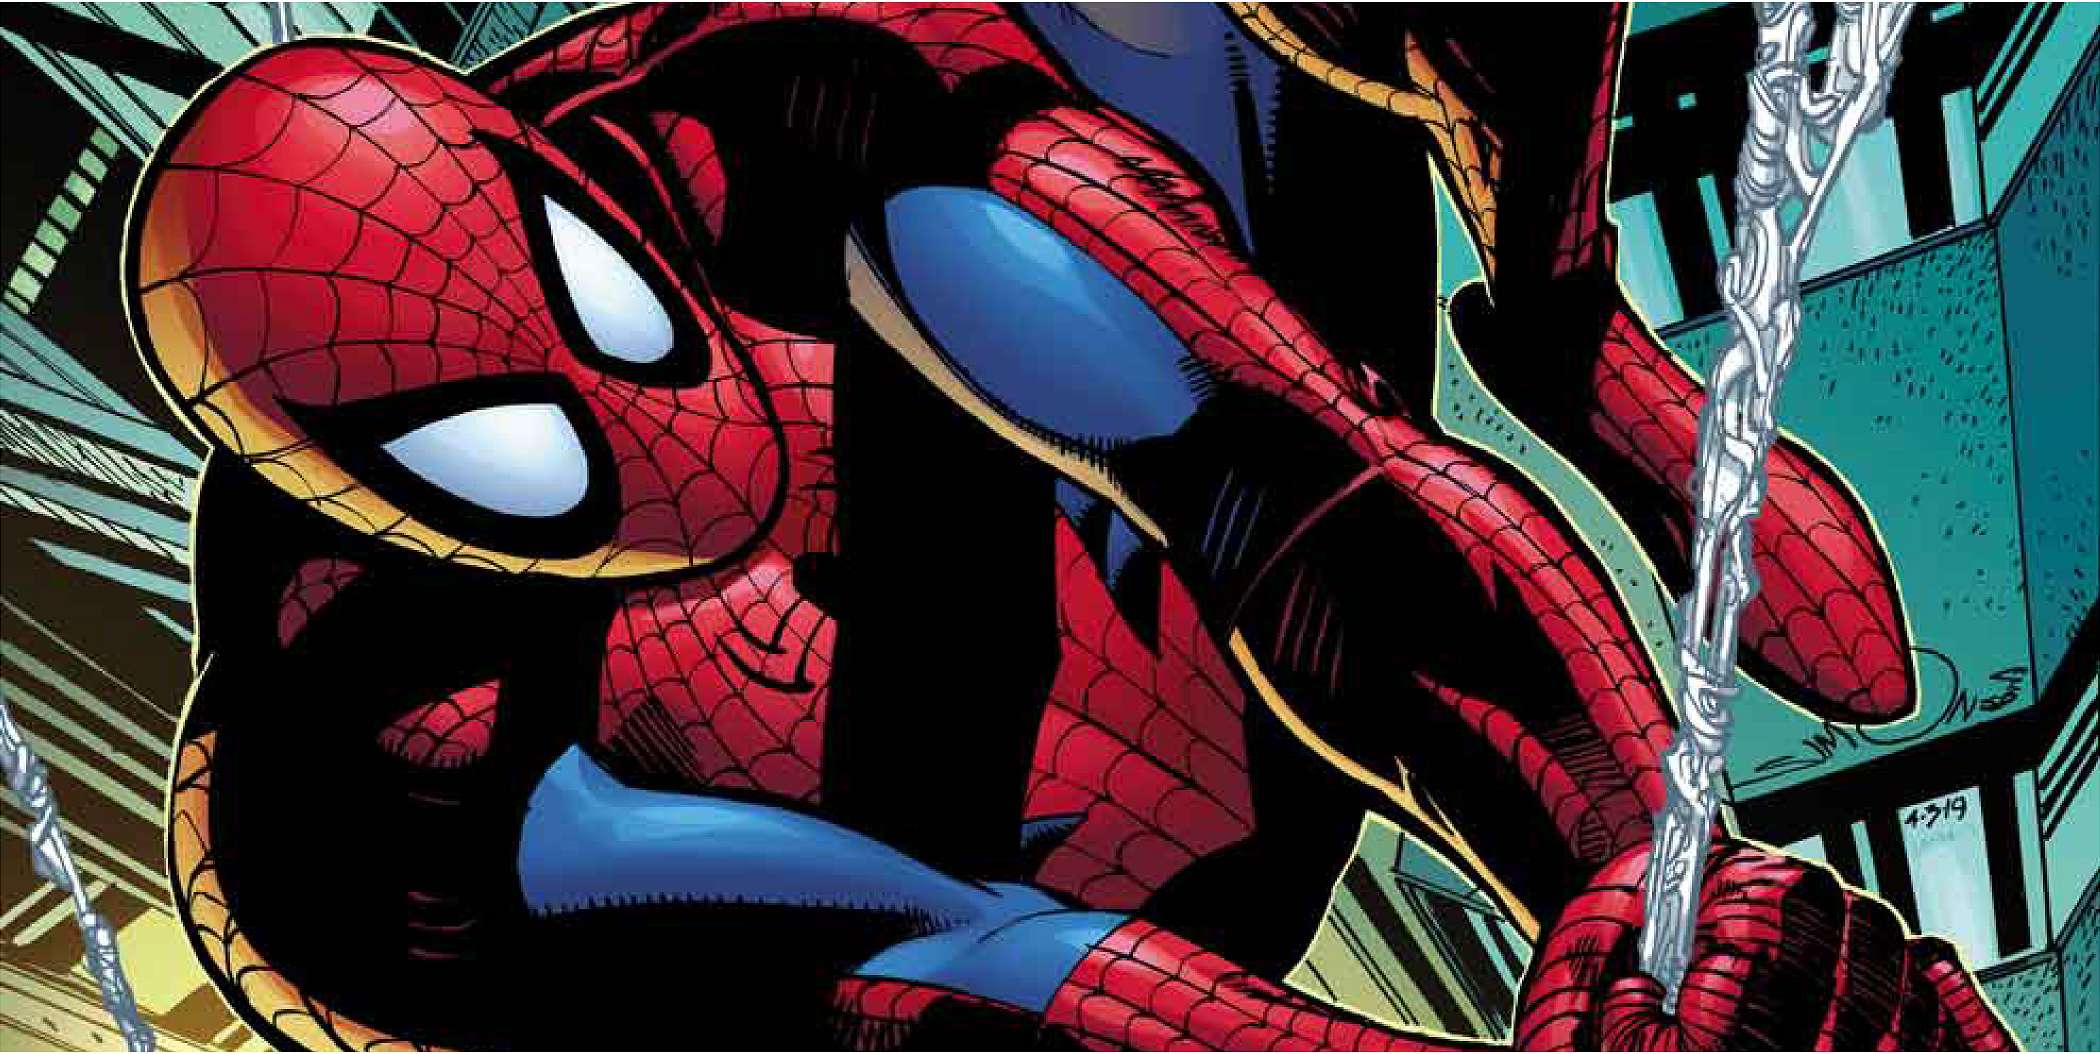 Variant Covers For Giant-Sized Amazing Spider-Man #25